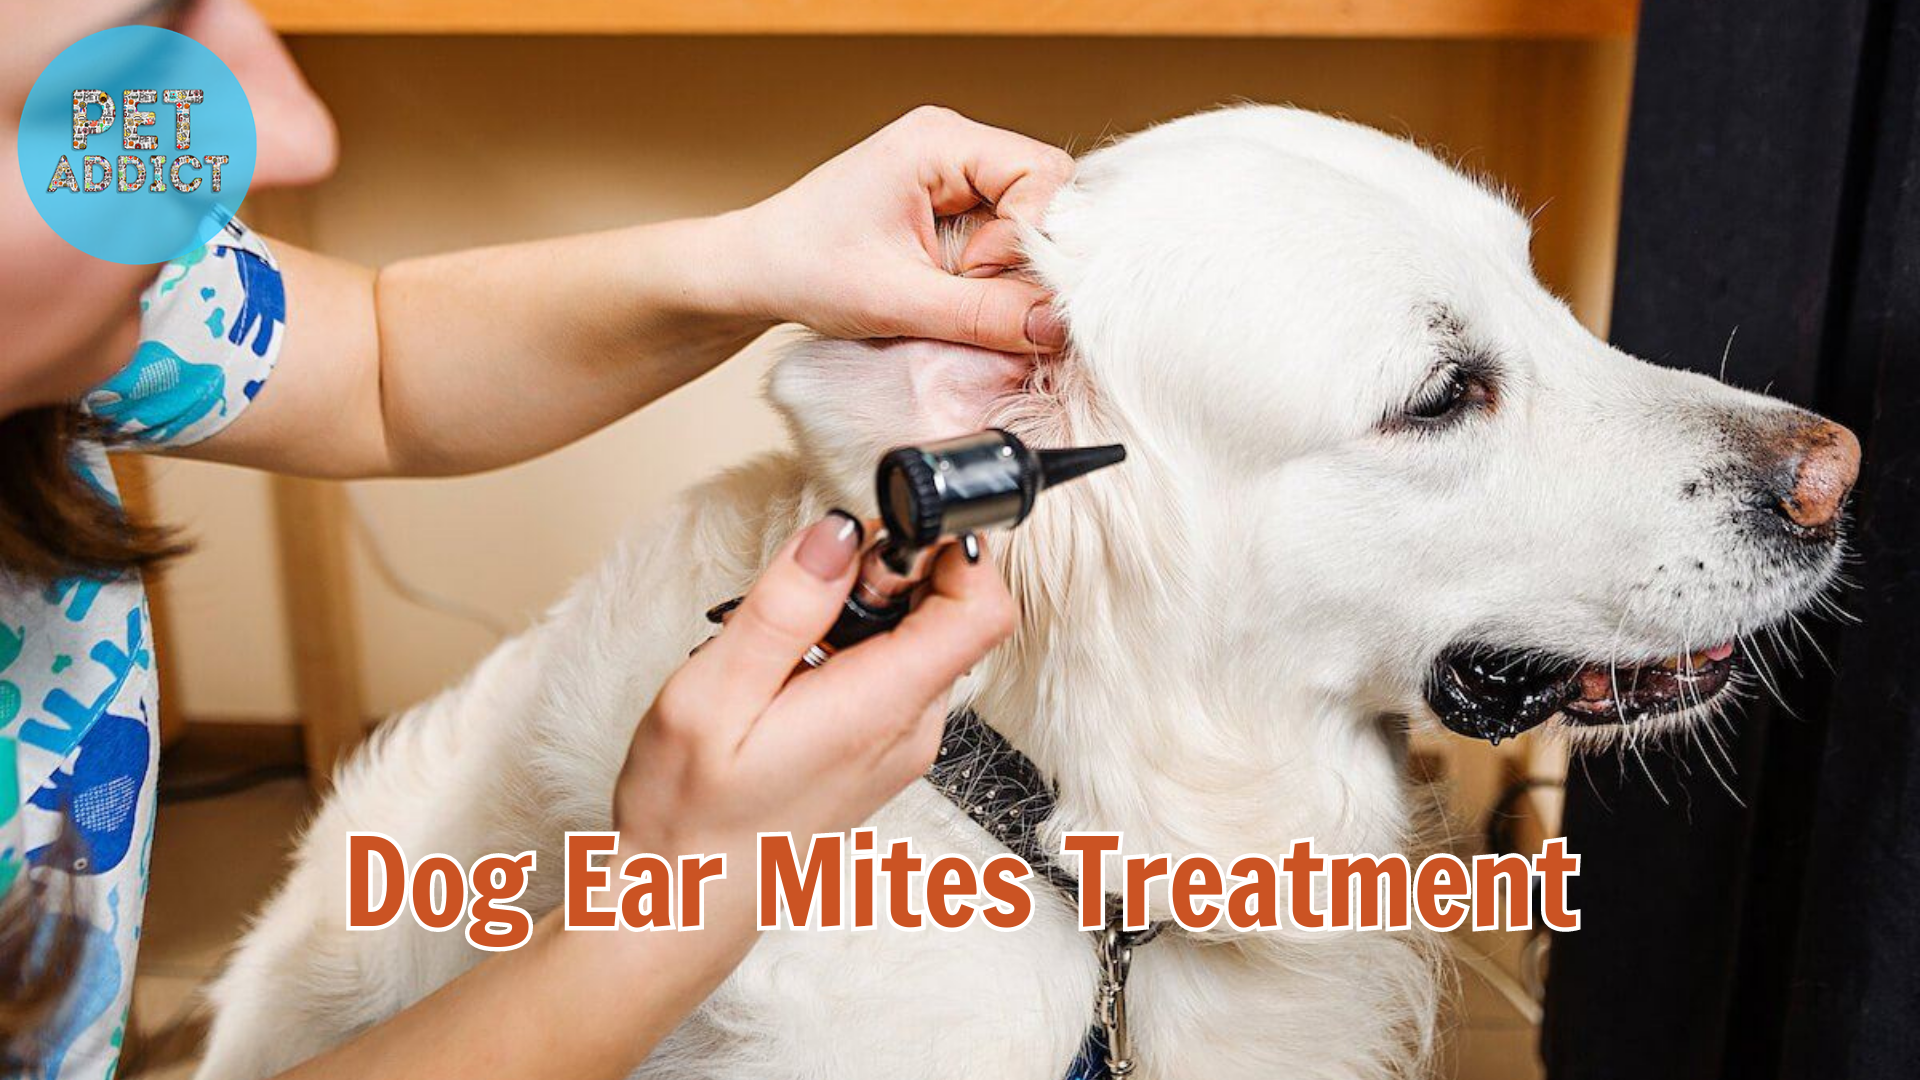 Dog Ear Mites Treatment: Eliminate Mites in Your Dog’s Ears